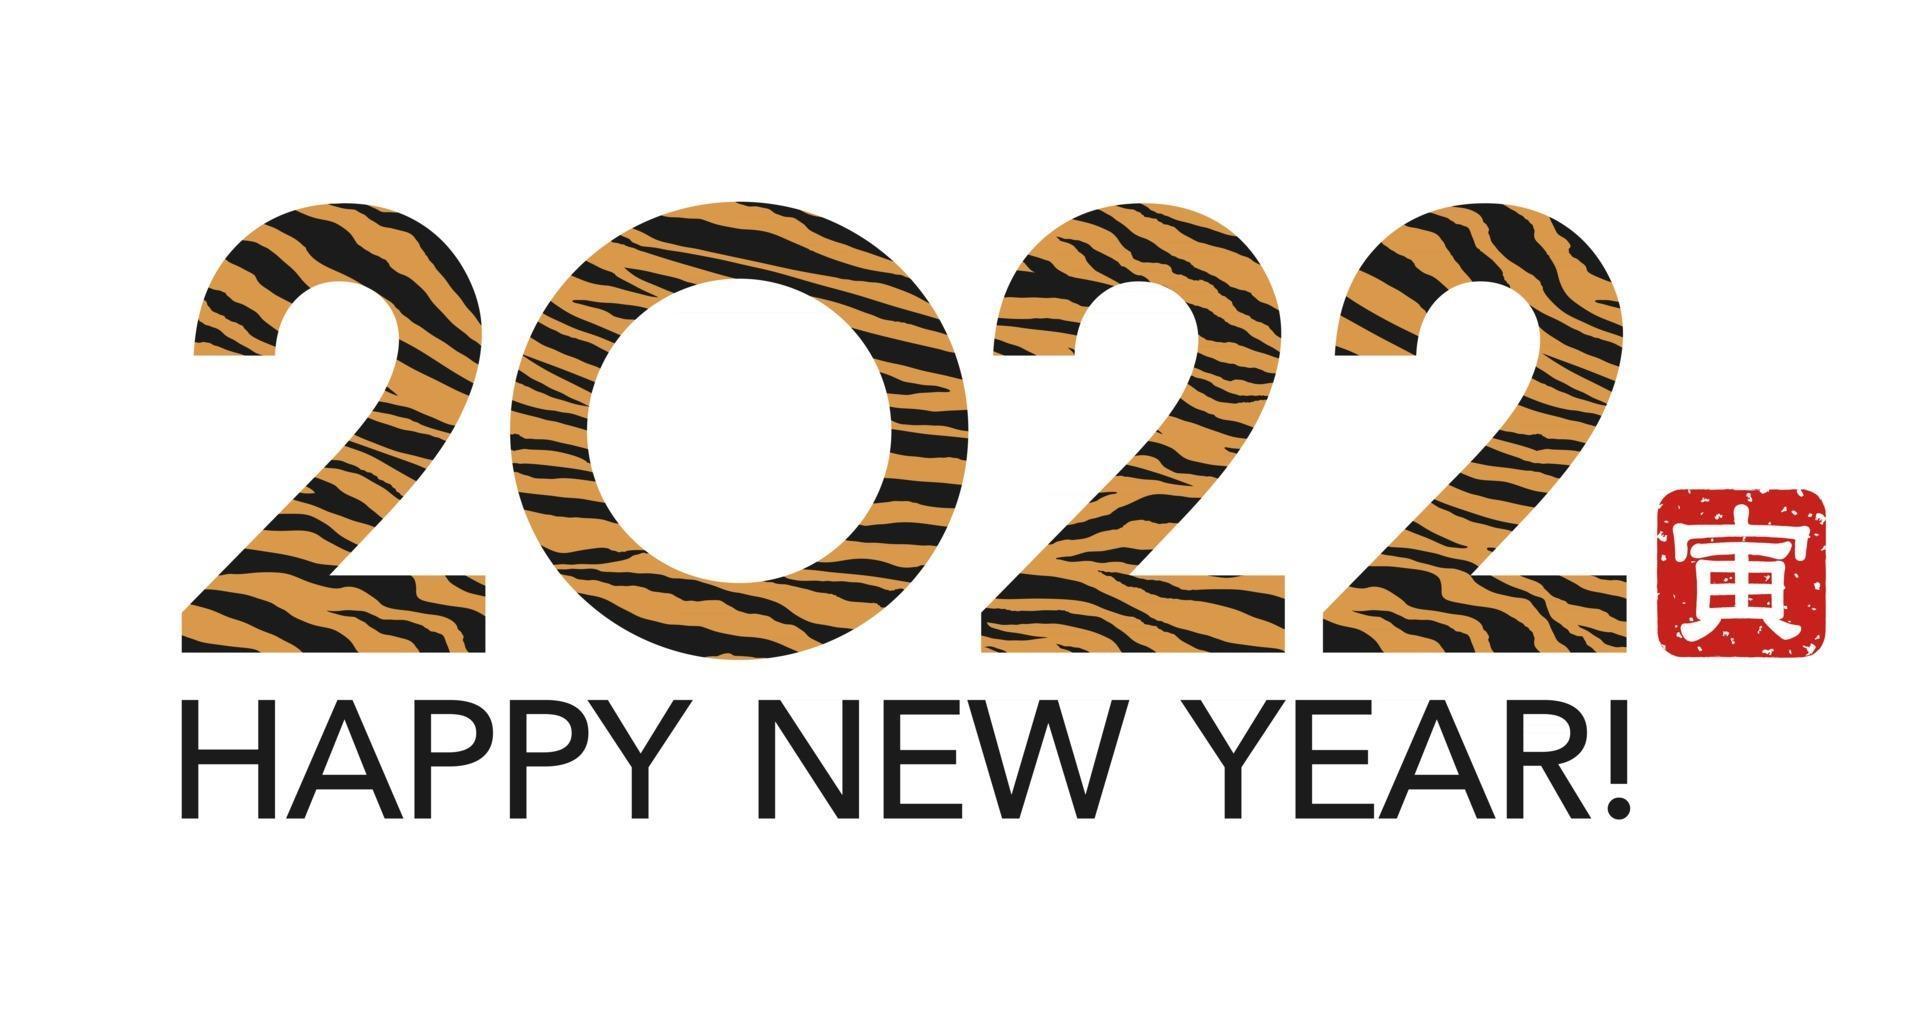 The Year 2022 New Years Greeting Symbol Decorated With